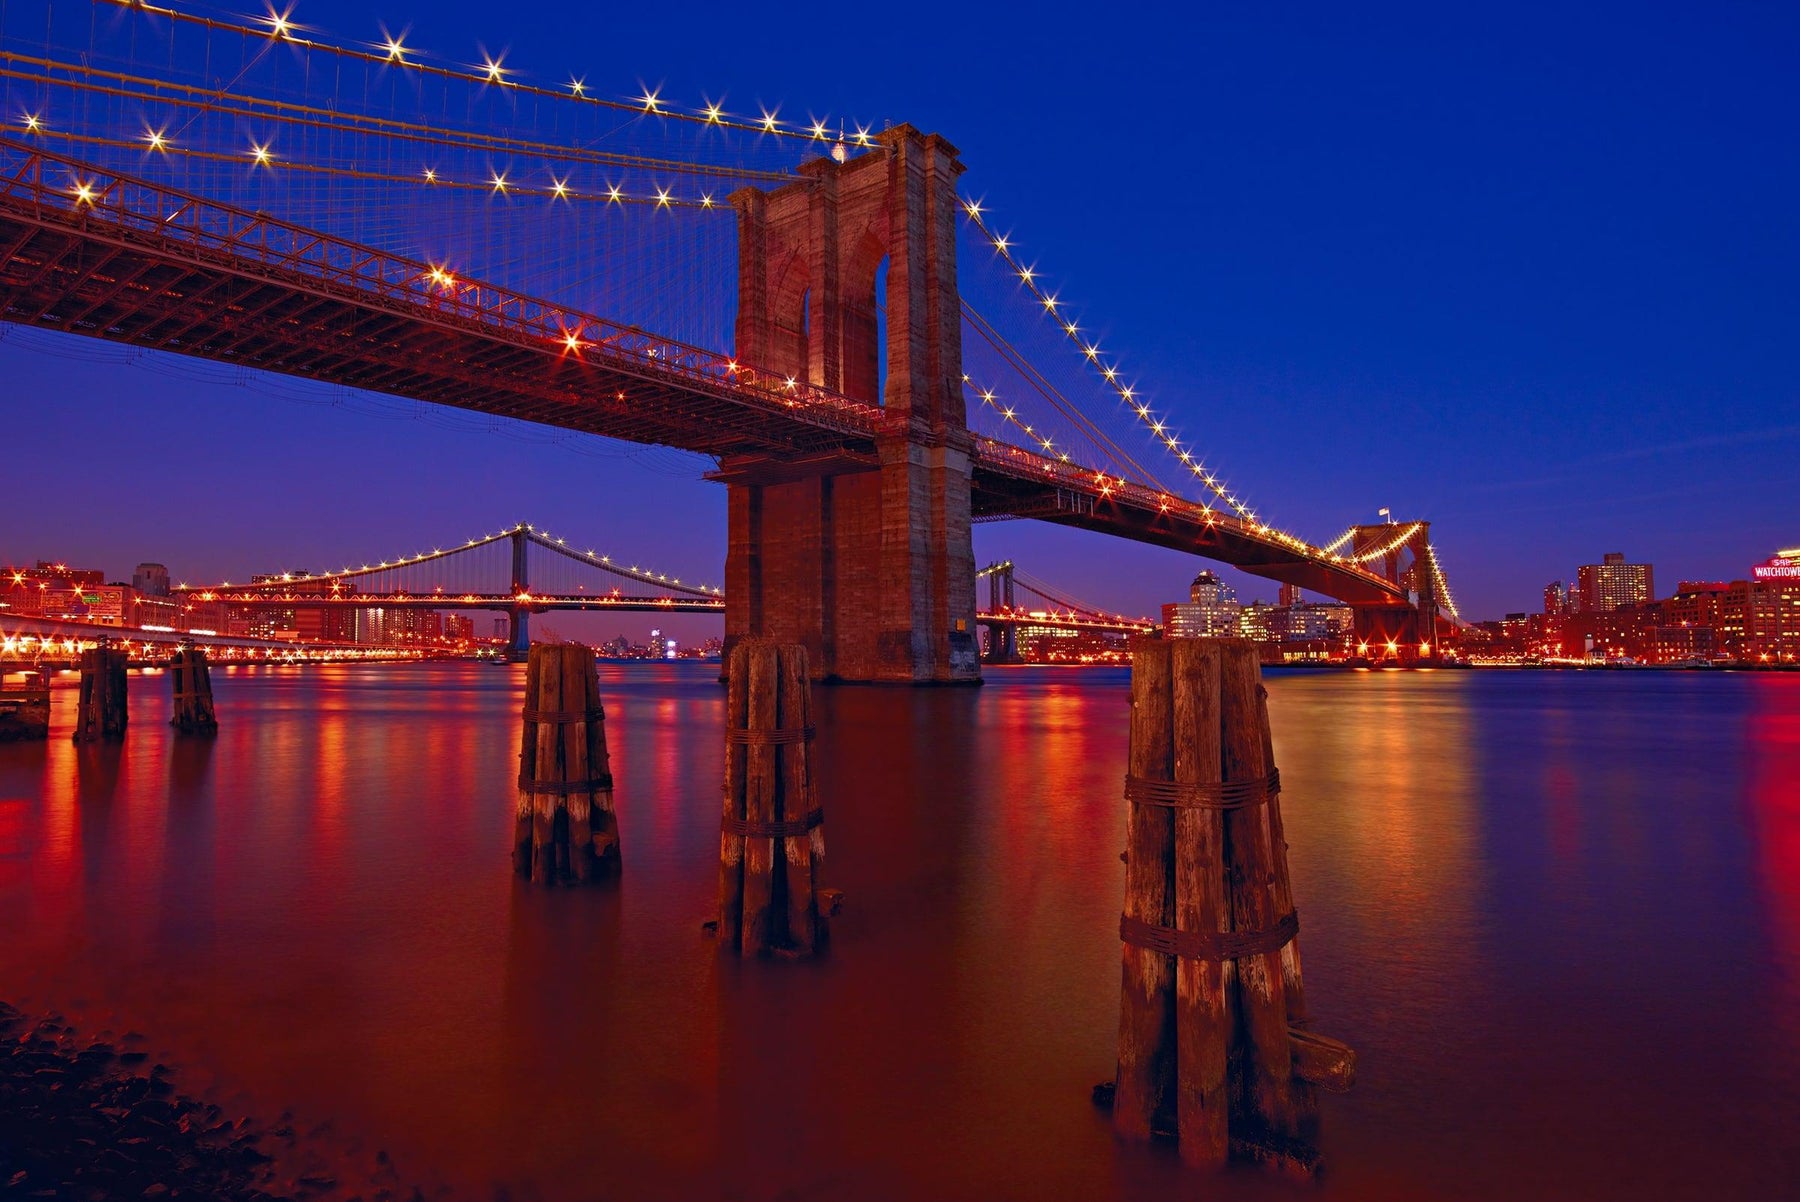 Brooklyn Bridge lit up at night from the waters edge with the Manhattan Bridge and New York City in the background